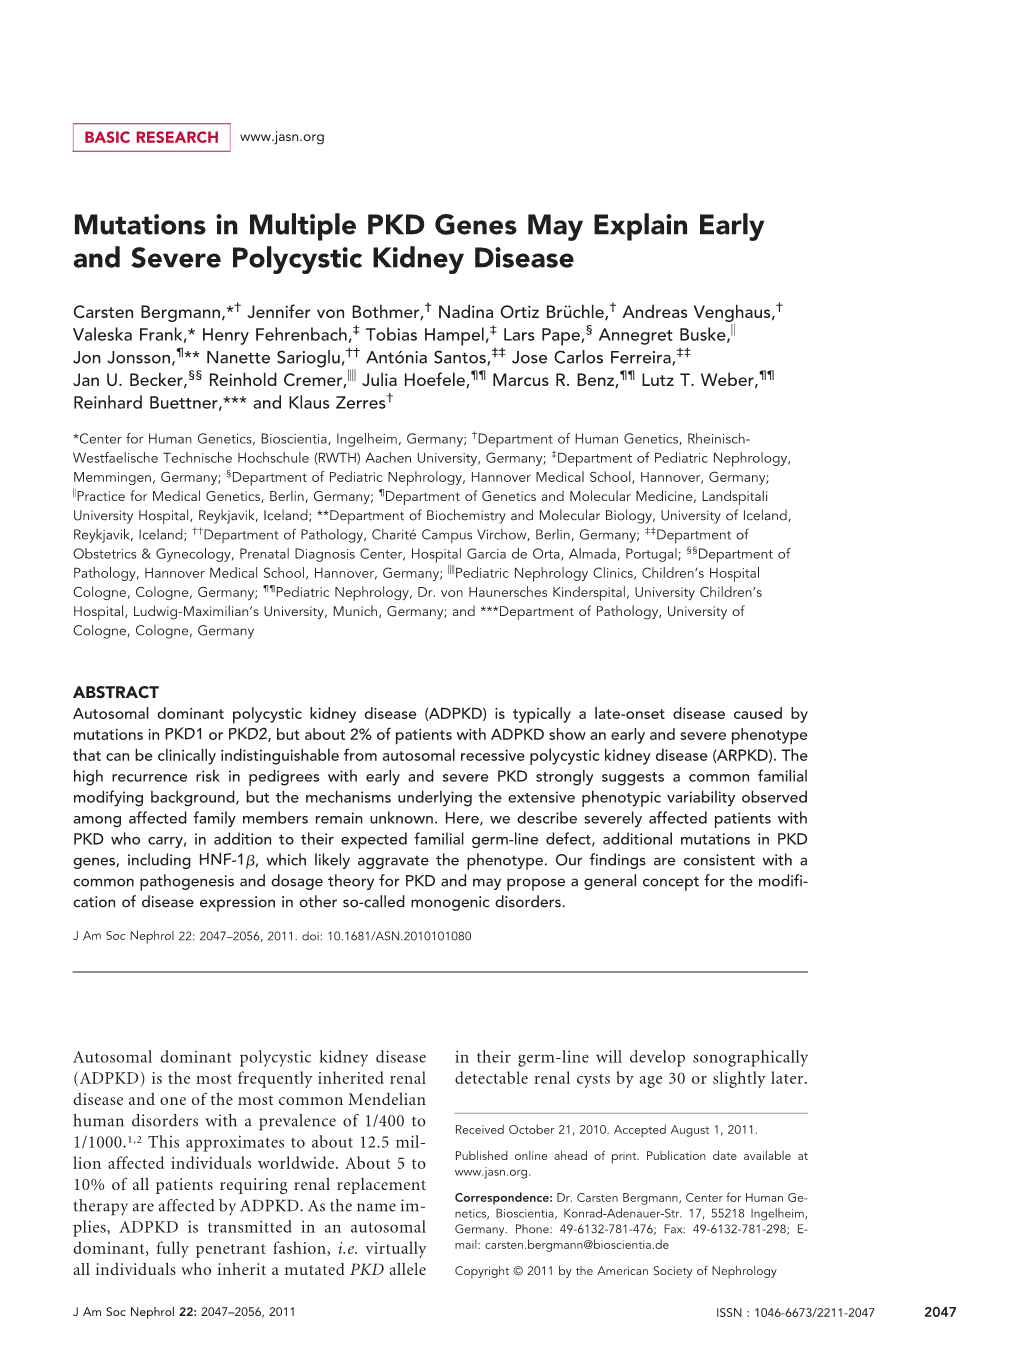 Mutations in Multiple PKD Genes May Explain Early and Severe Polycystic Kidney Disease